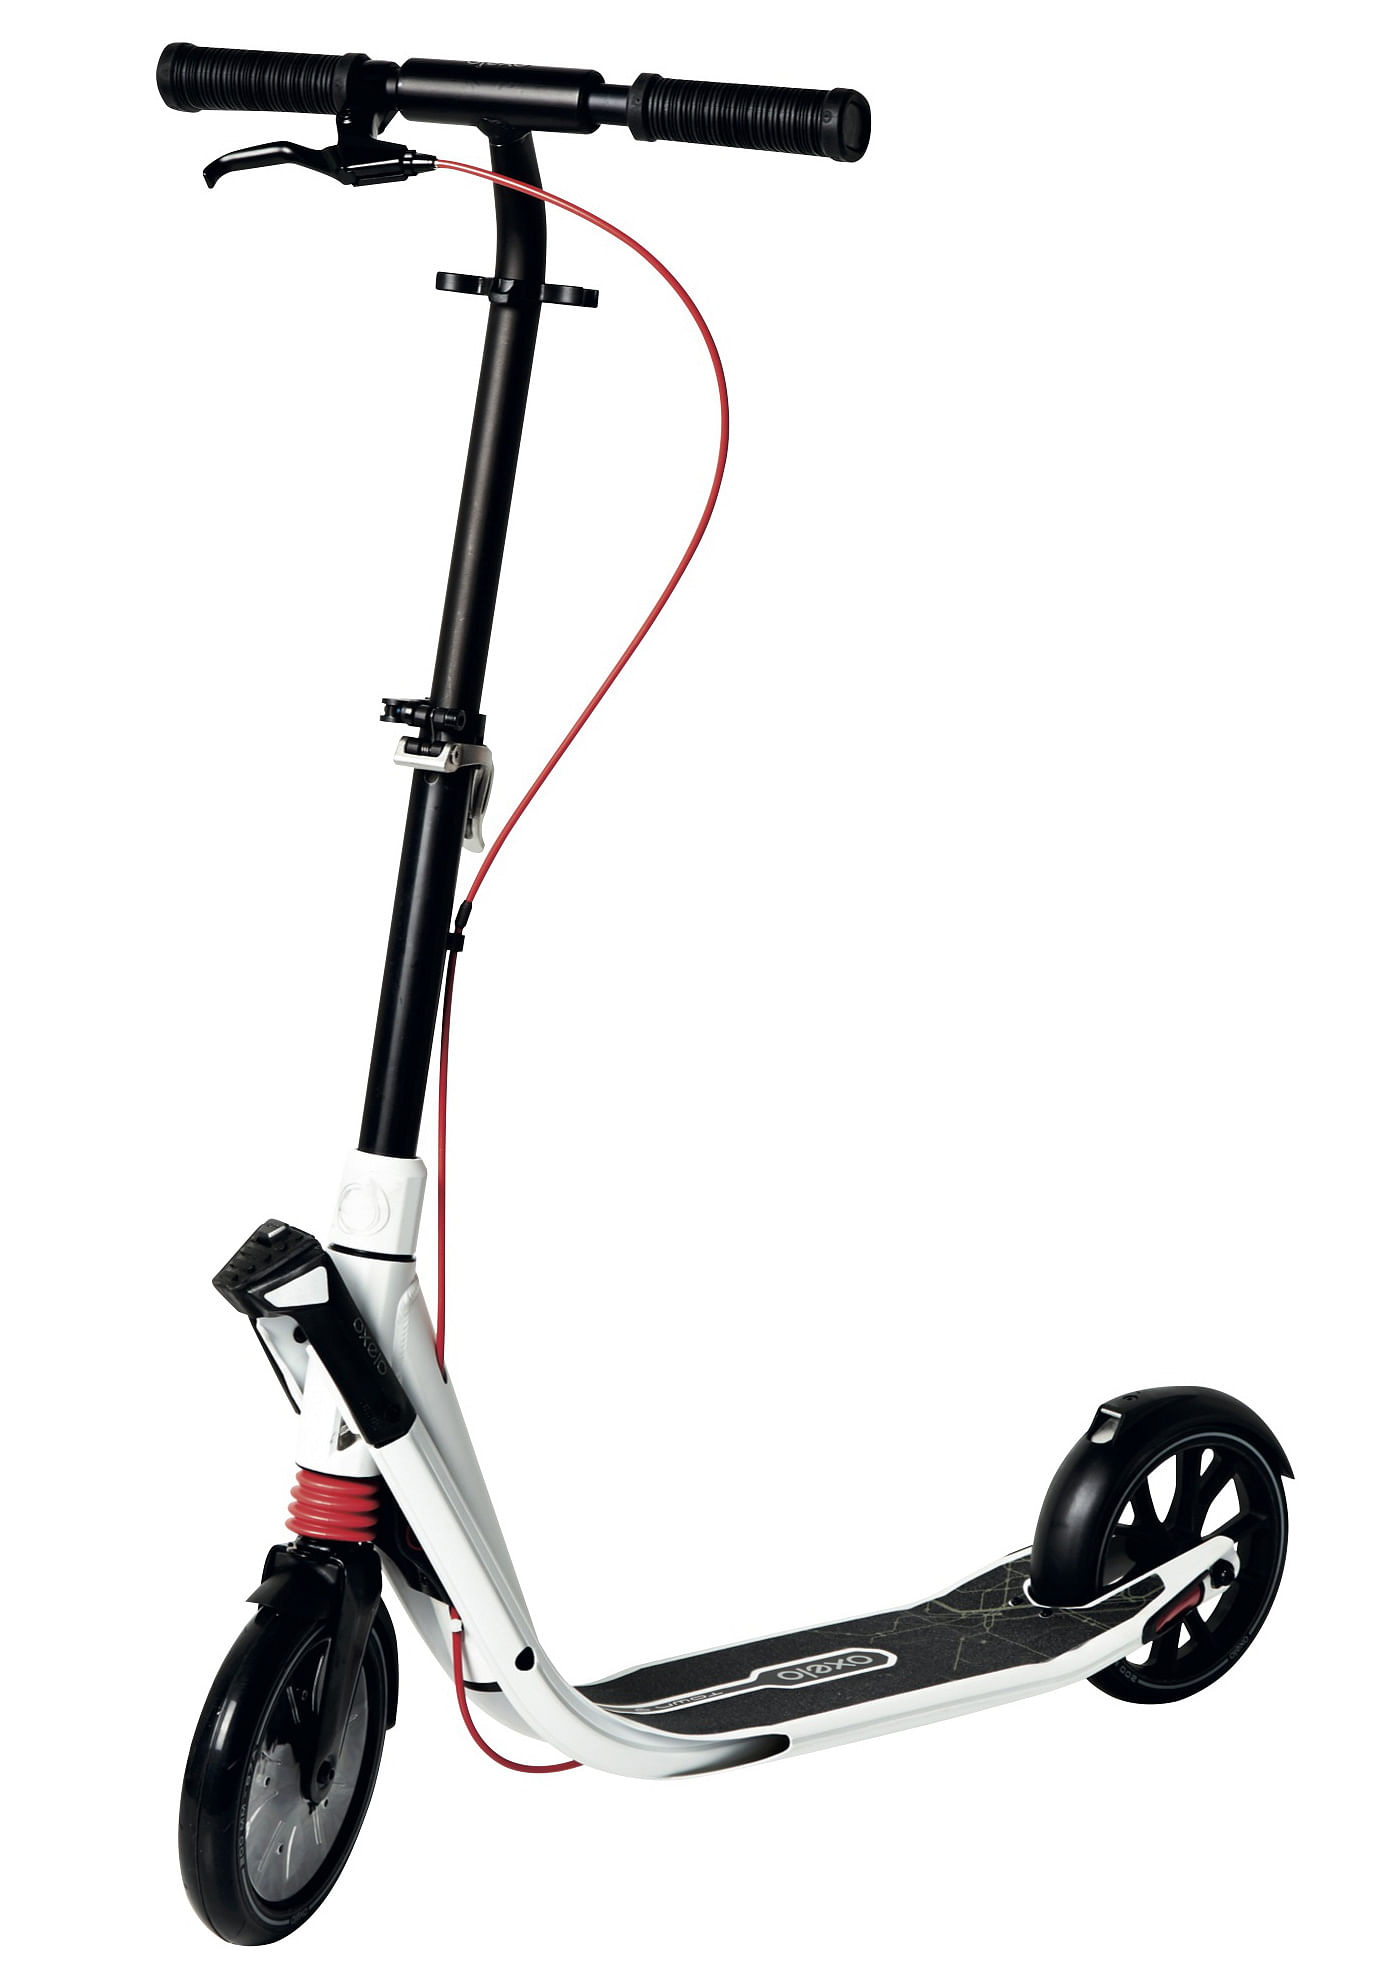 decathlon scooter review